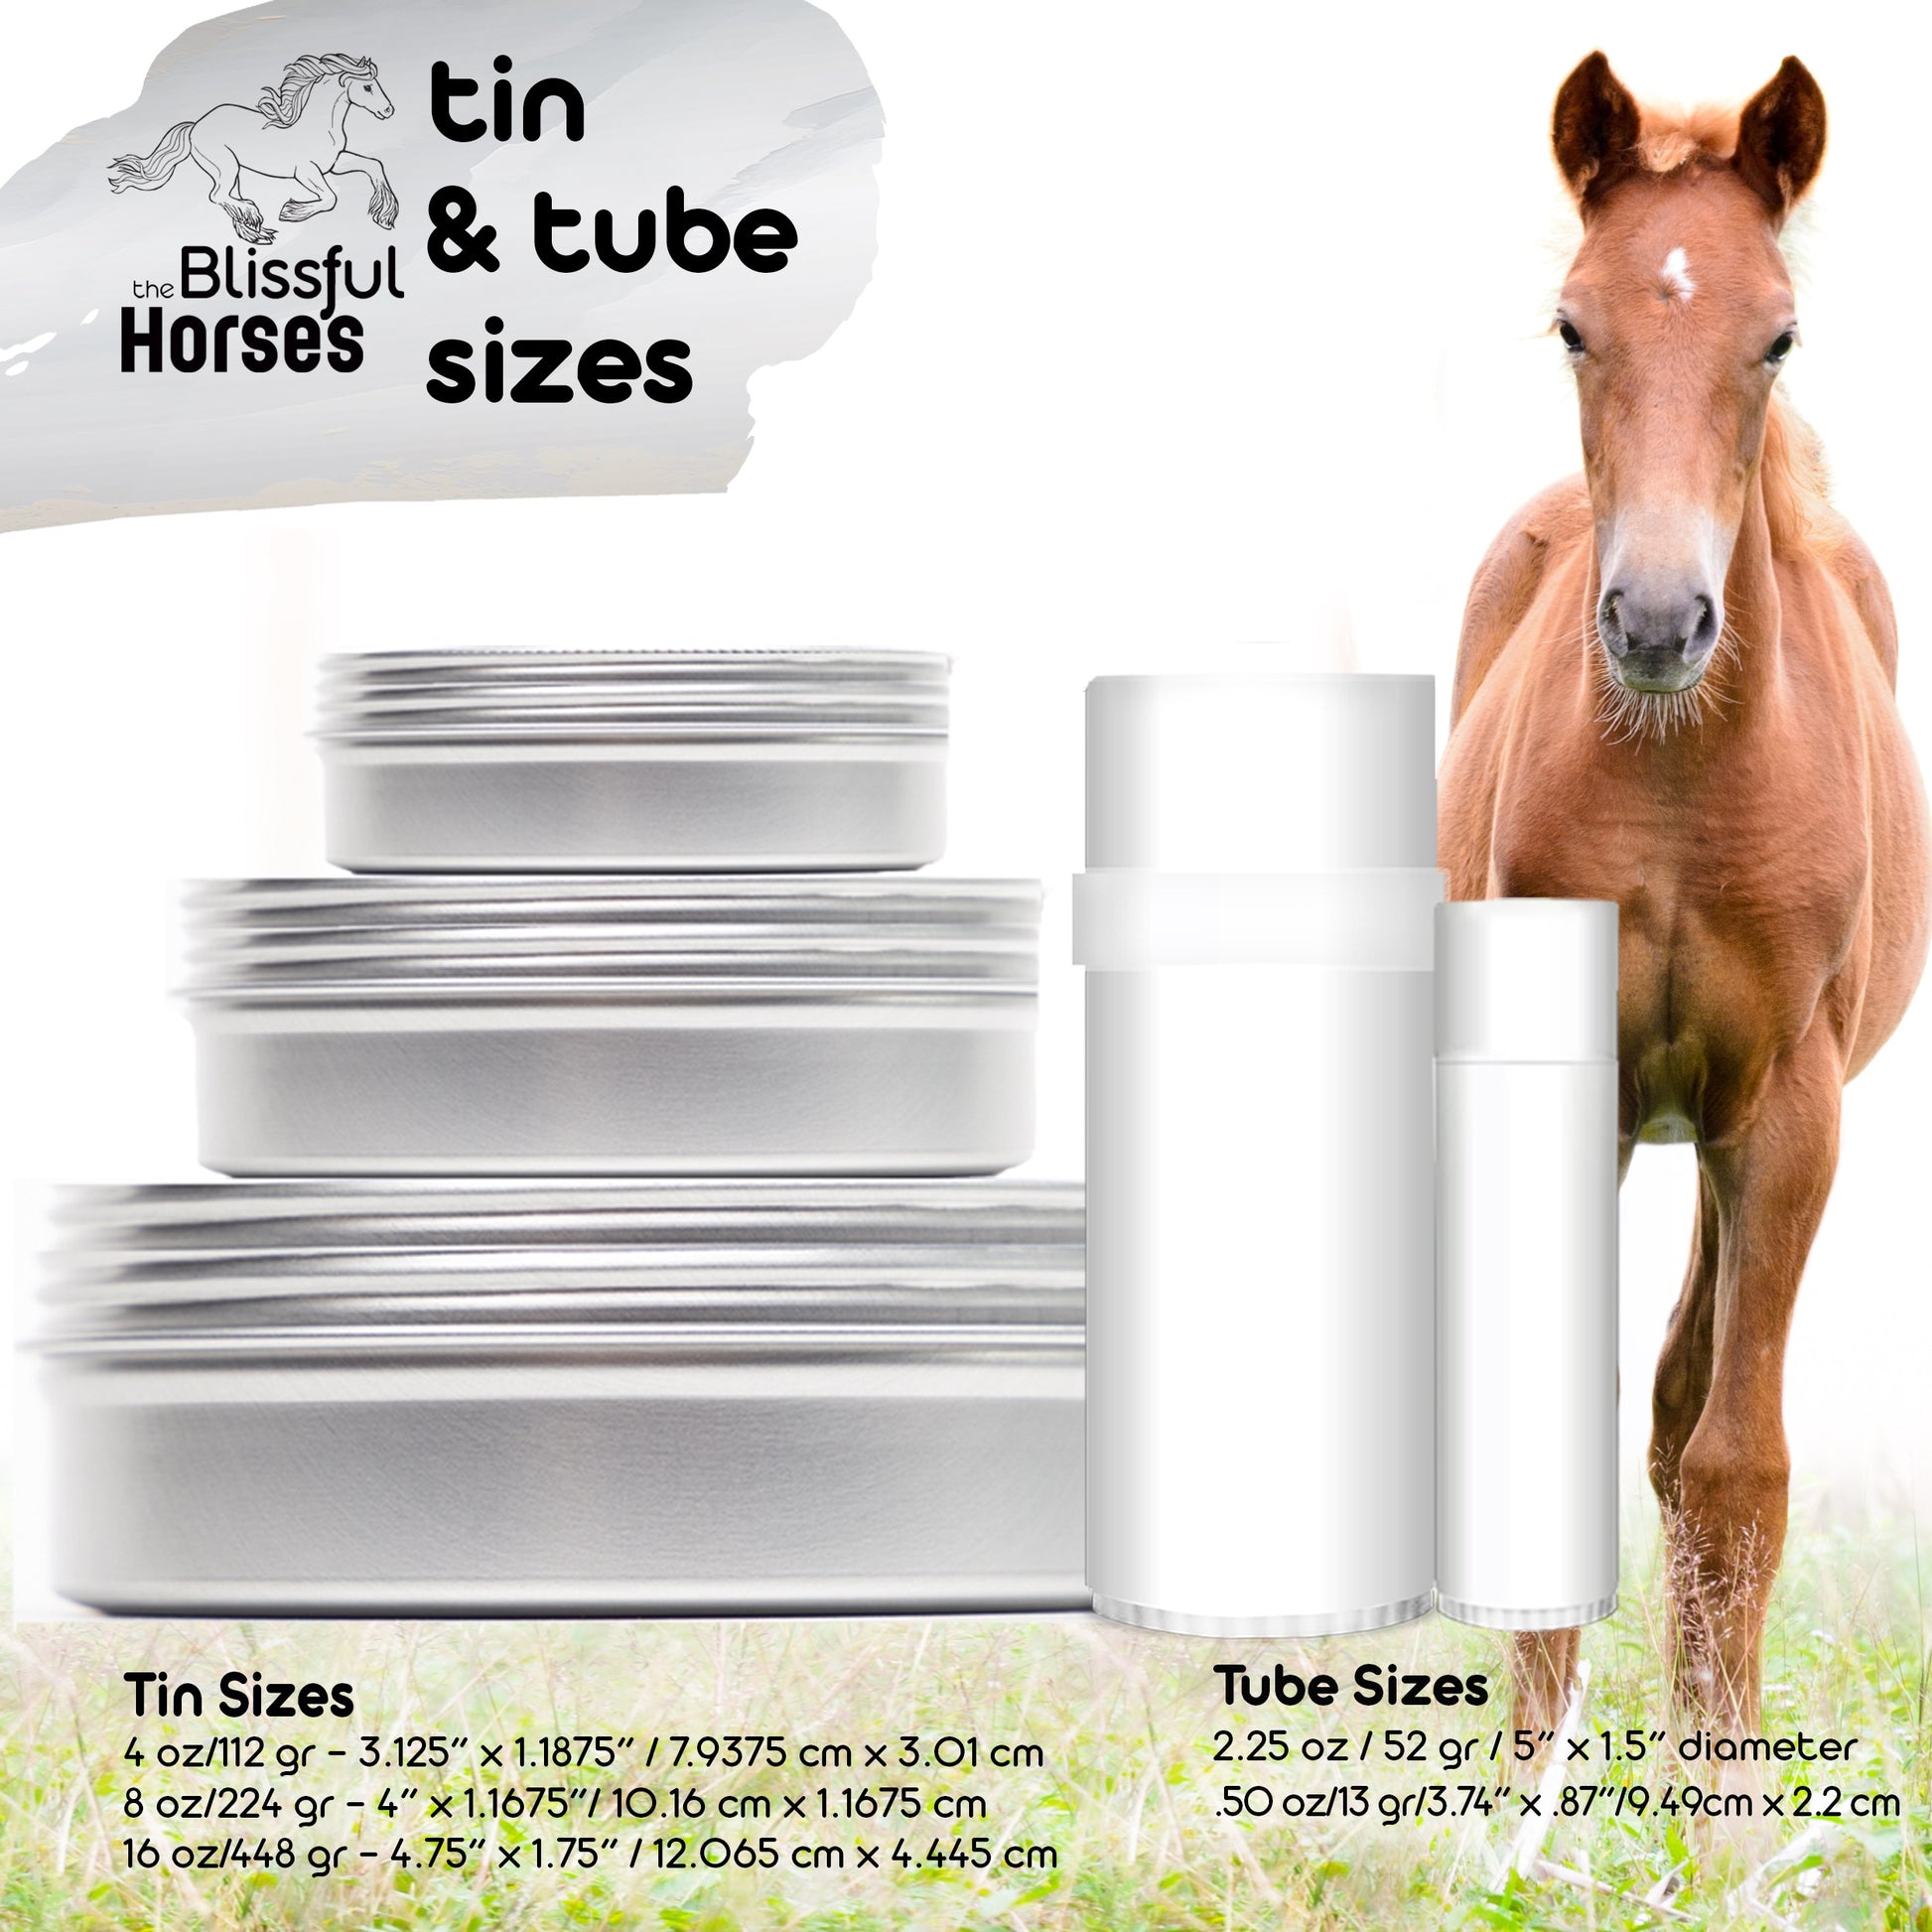 bug off butter balm for horses